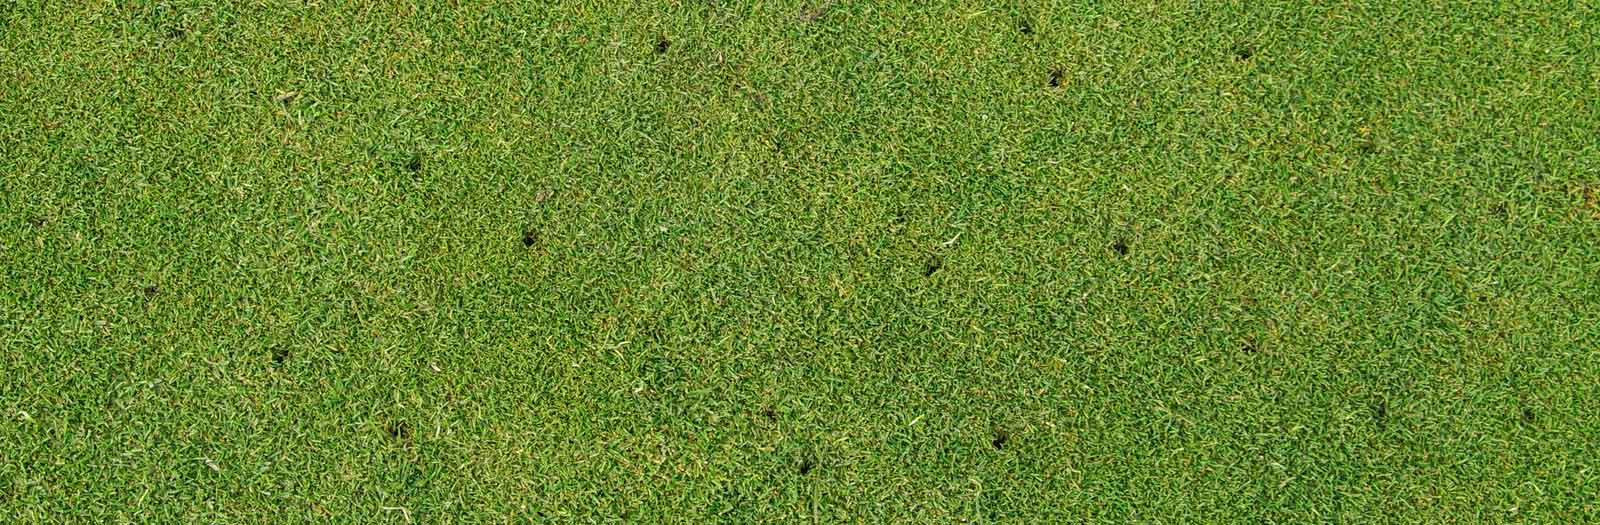 close view of an aerated lawn